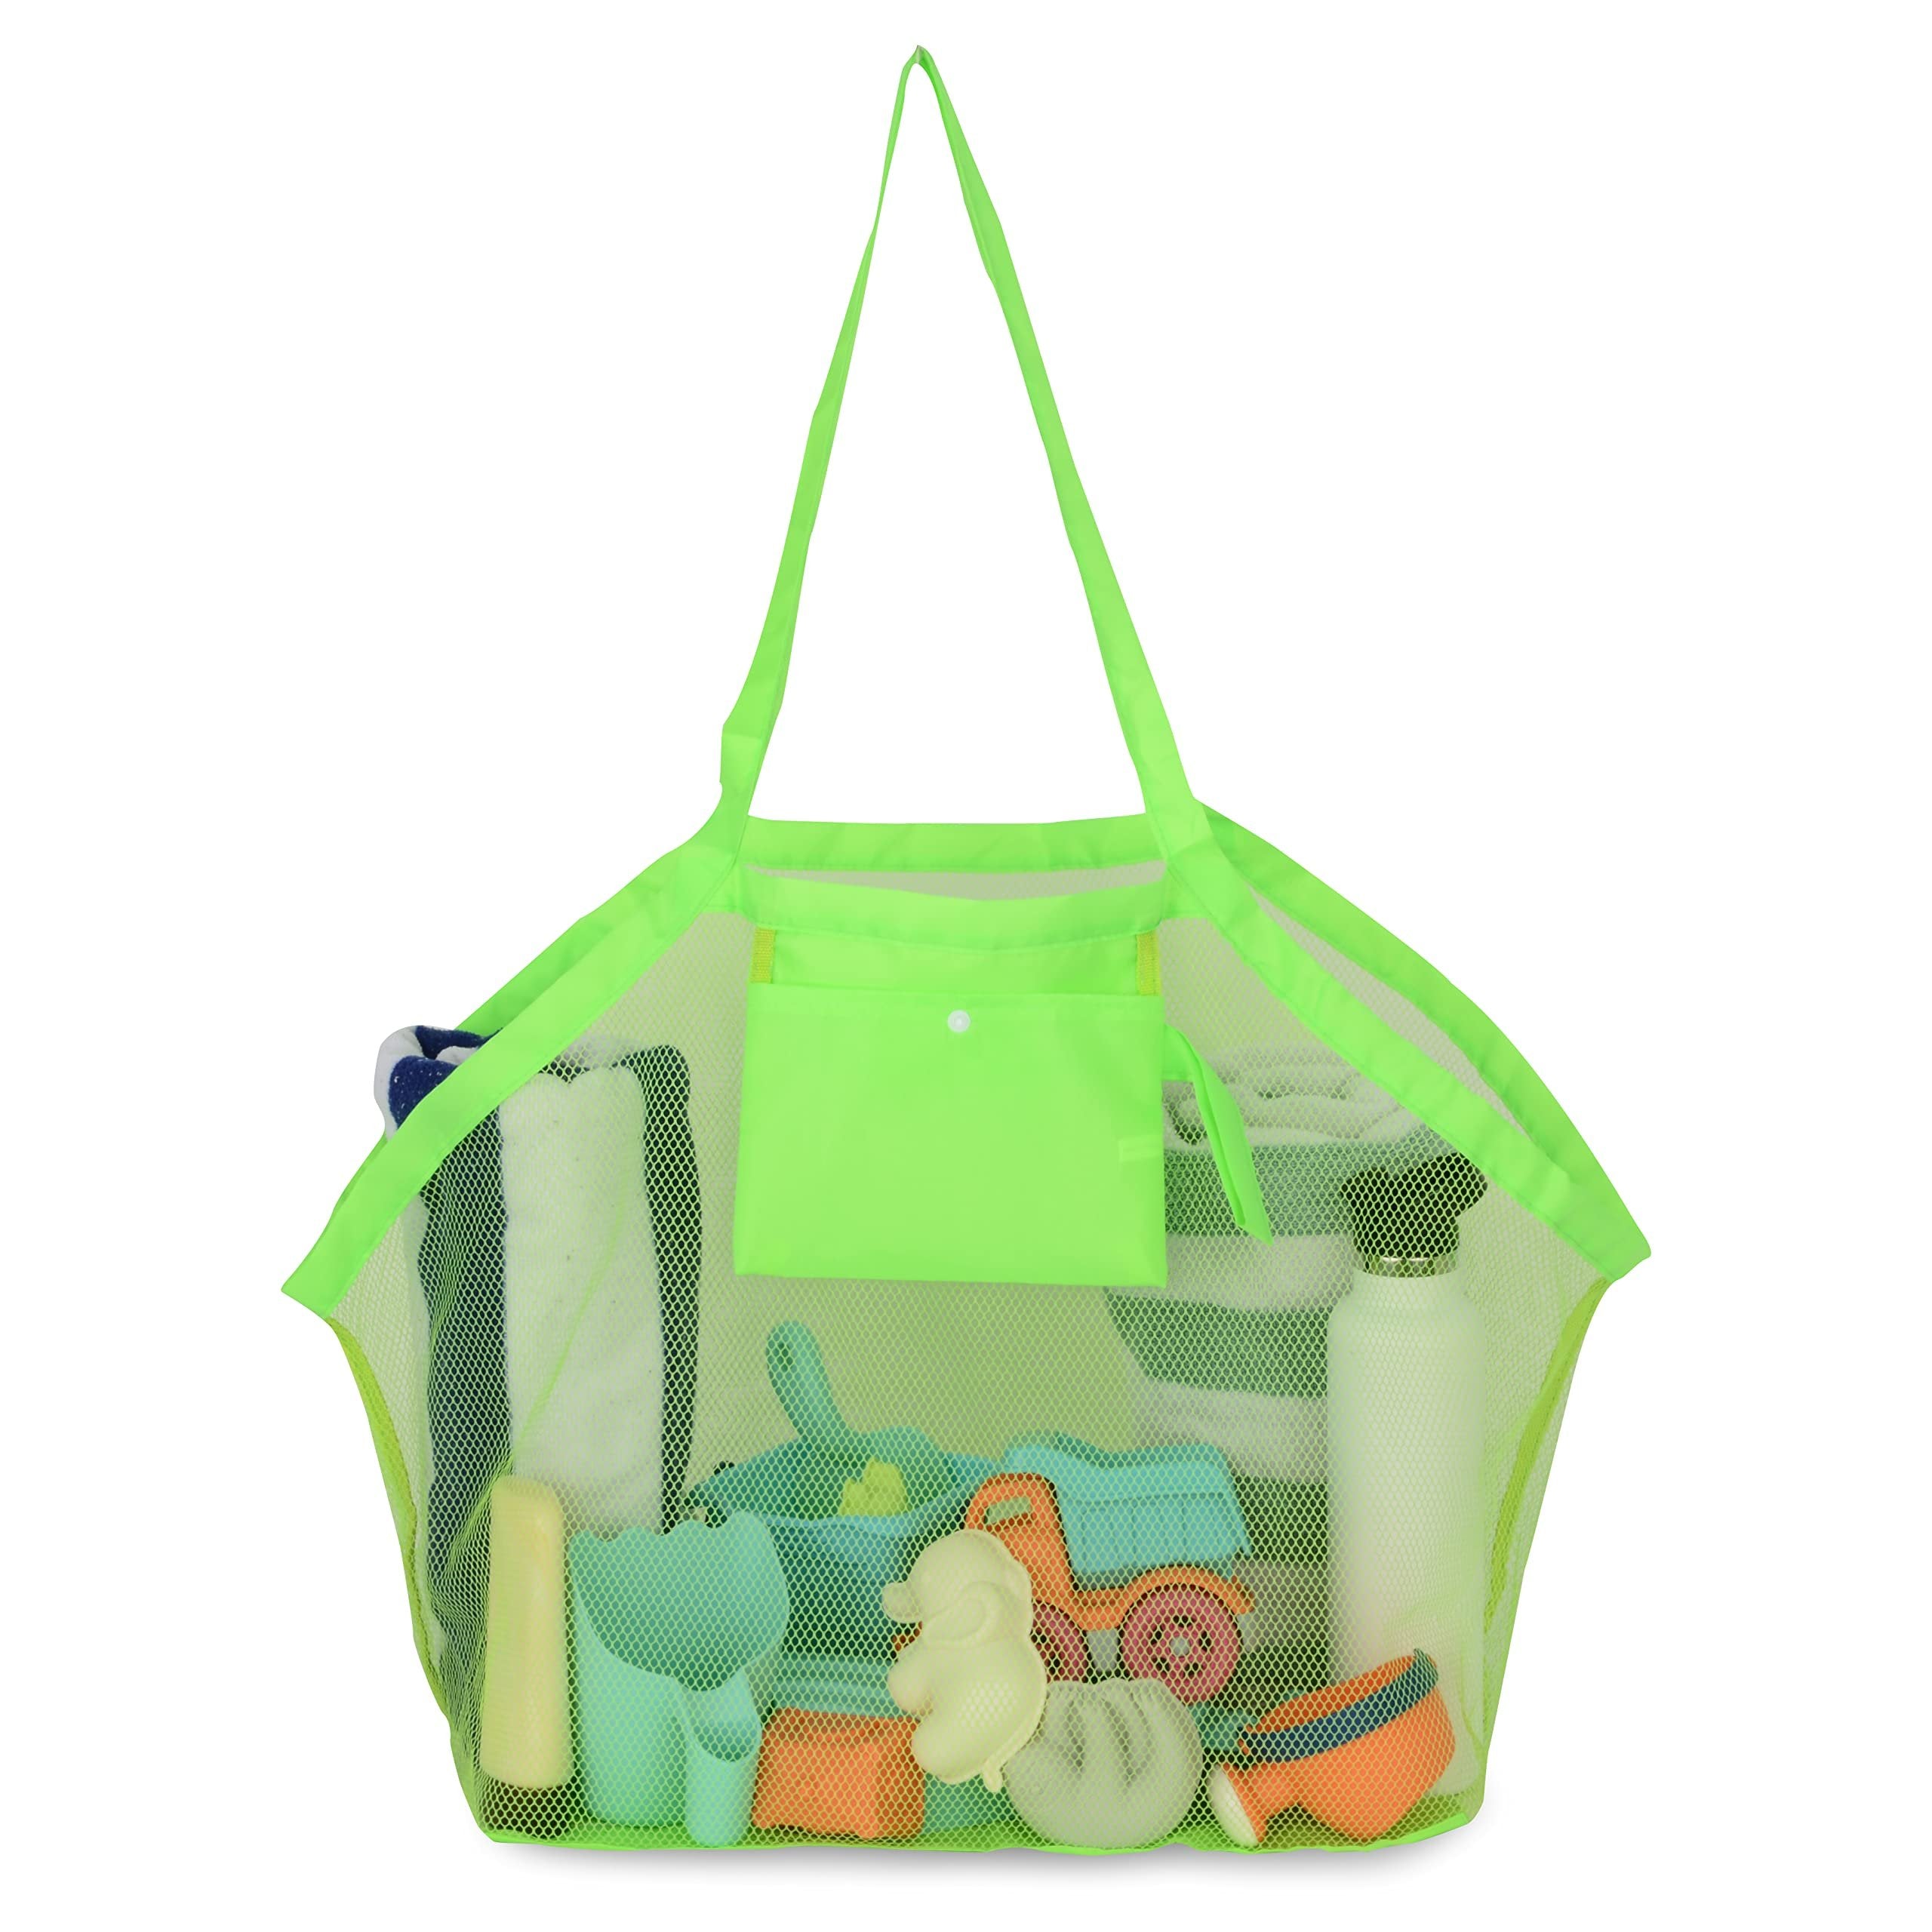 Beach Toy Bag - Mesh Beach Toy Bag, Large Foldable Green Mesh Beach Tote, Pool Bag for Sand Toys, Towels, Seashells, Swimming Accessories, Travel, Family Vacation, Summer, Waterpark Must Haves